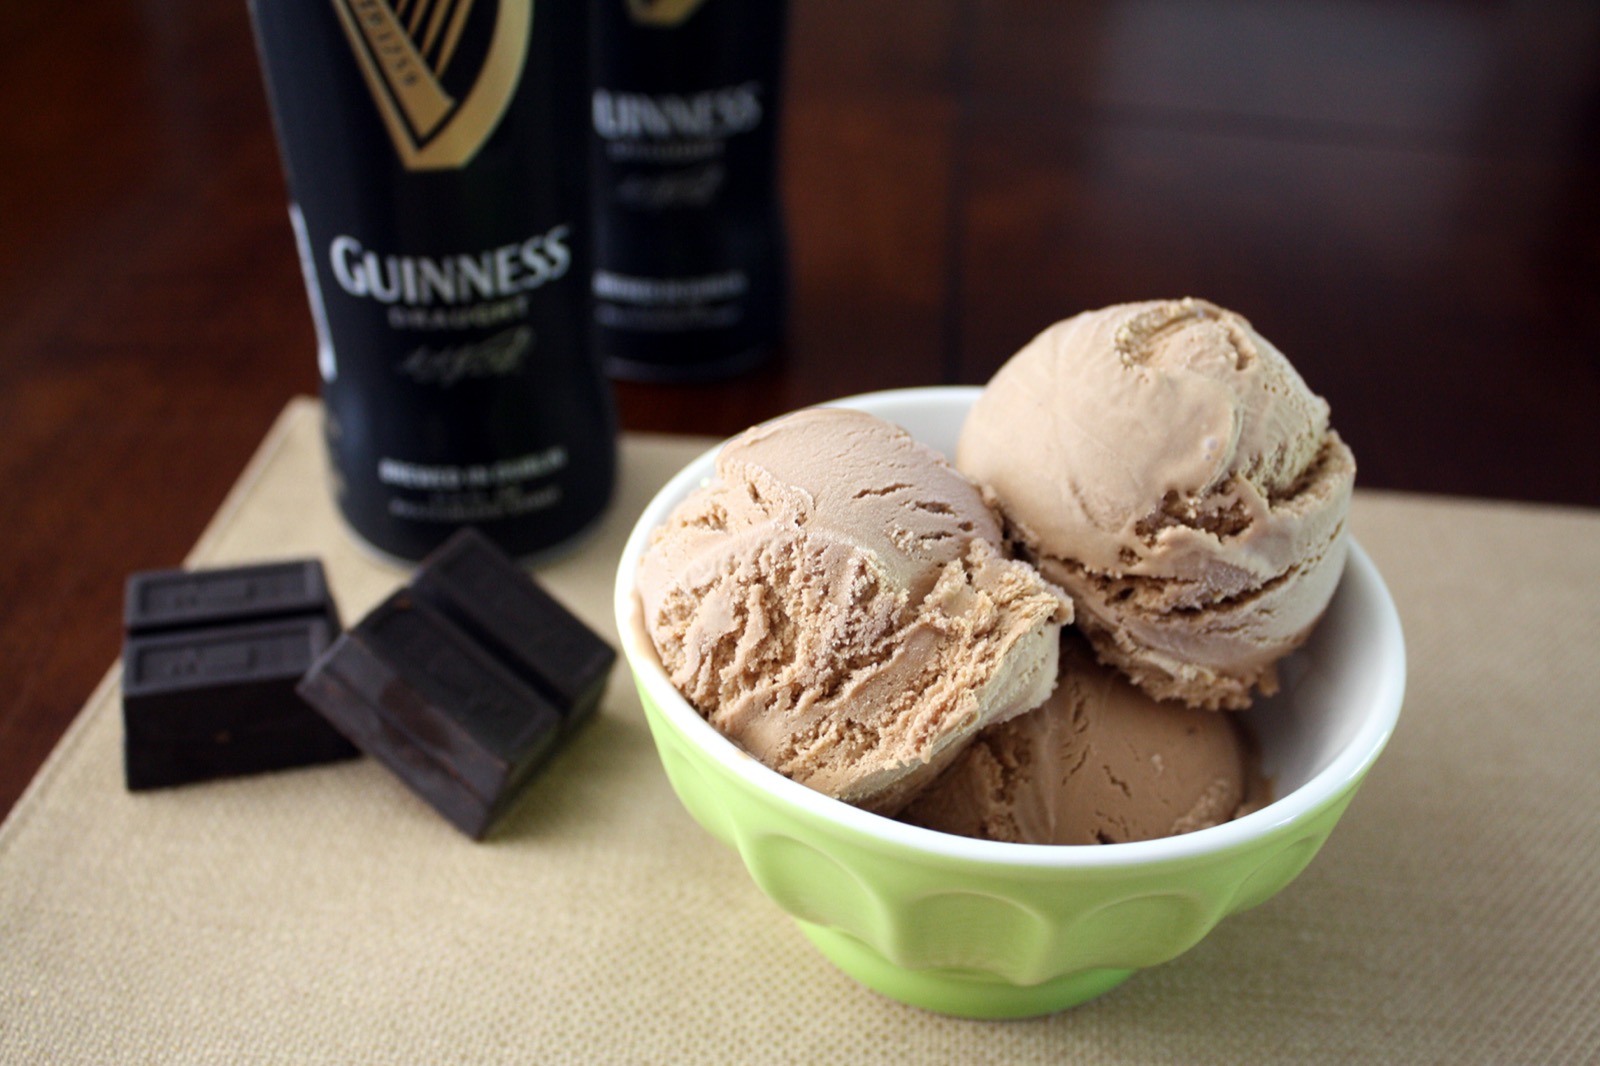 🍦 It’s Time to Vote “Yay” Or “Nay” On These Unusual Ice Cream Flavors Guinness Milk Chocolate Ice Cream